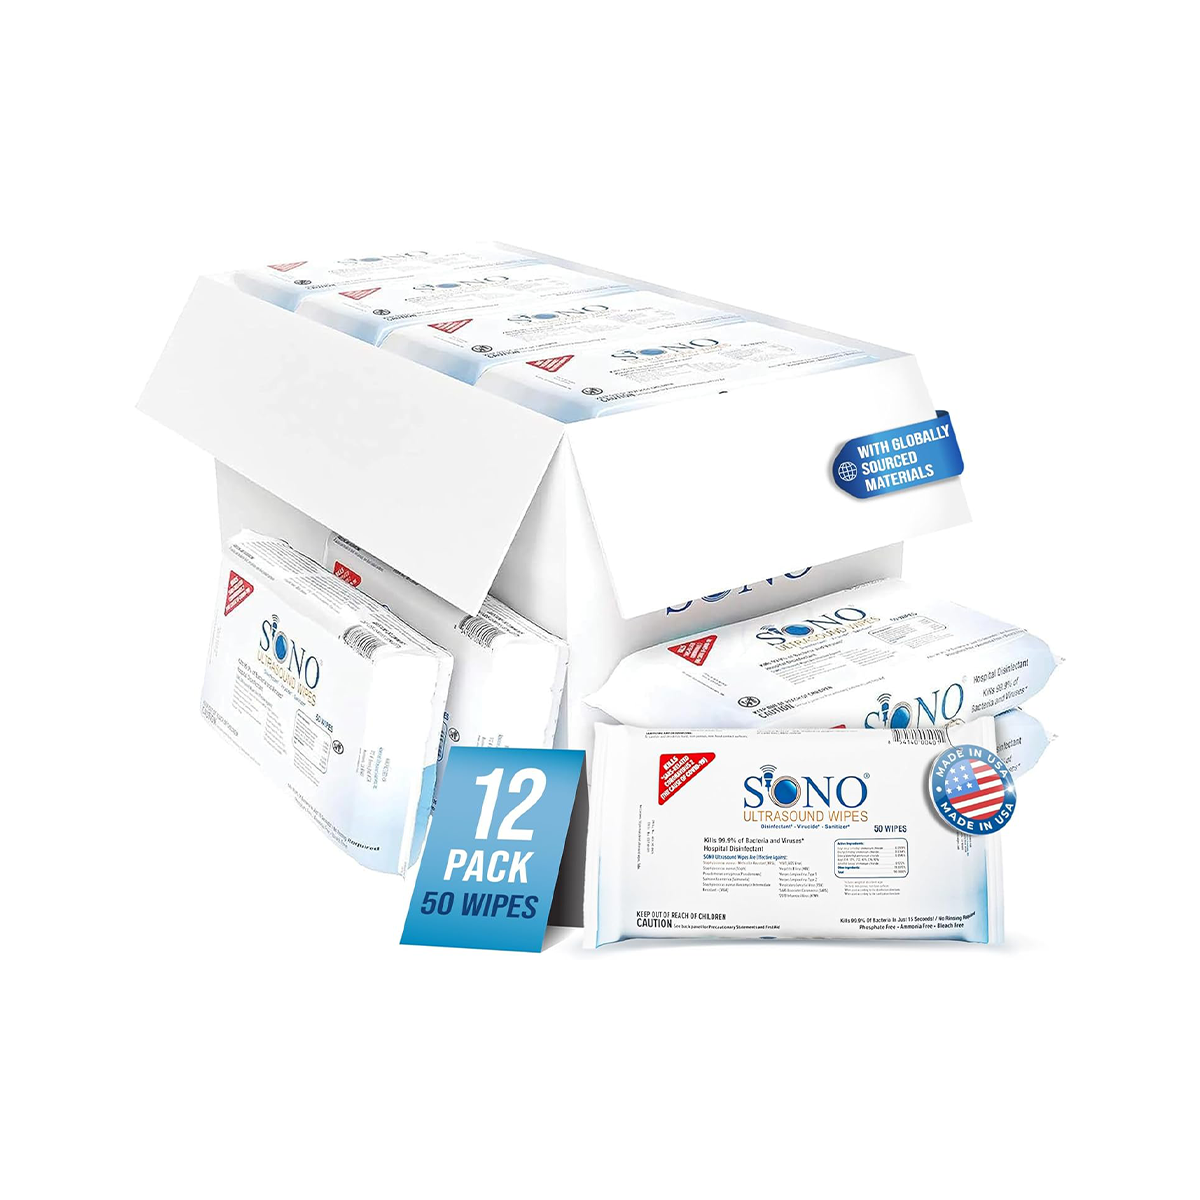 SONO Ultrasound Wipes & Single Use Scanning Gel Combo Pack